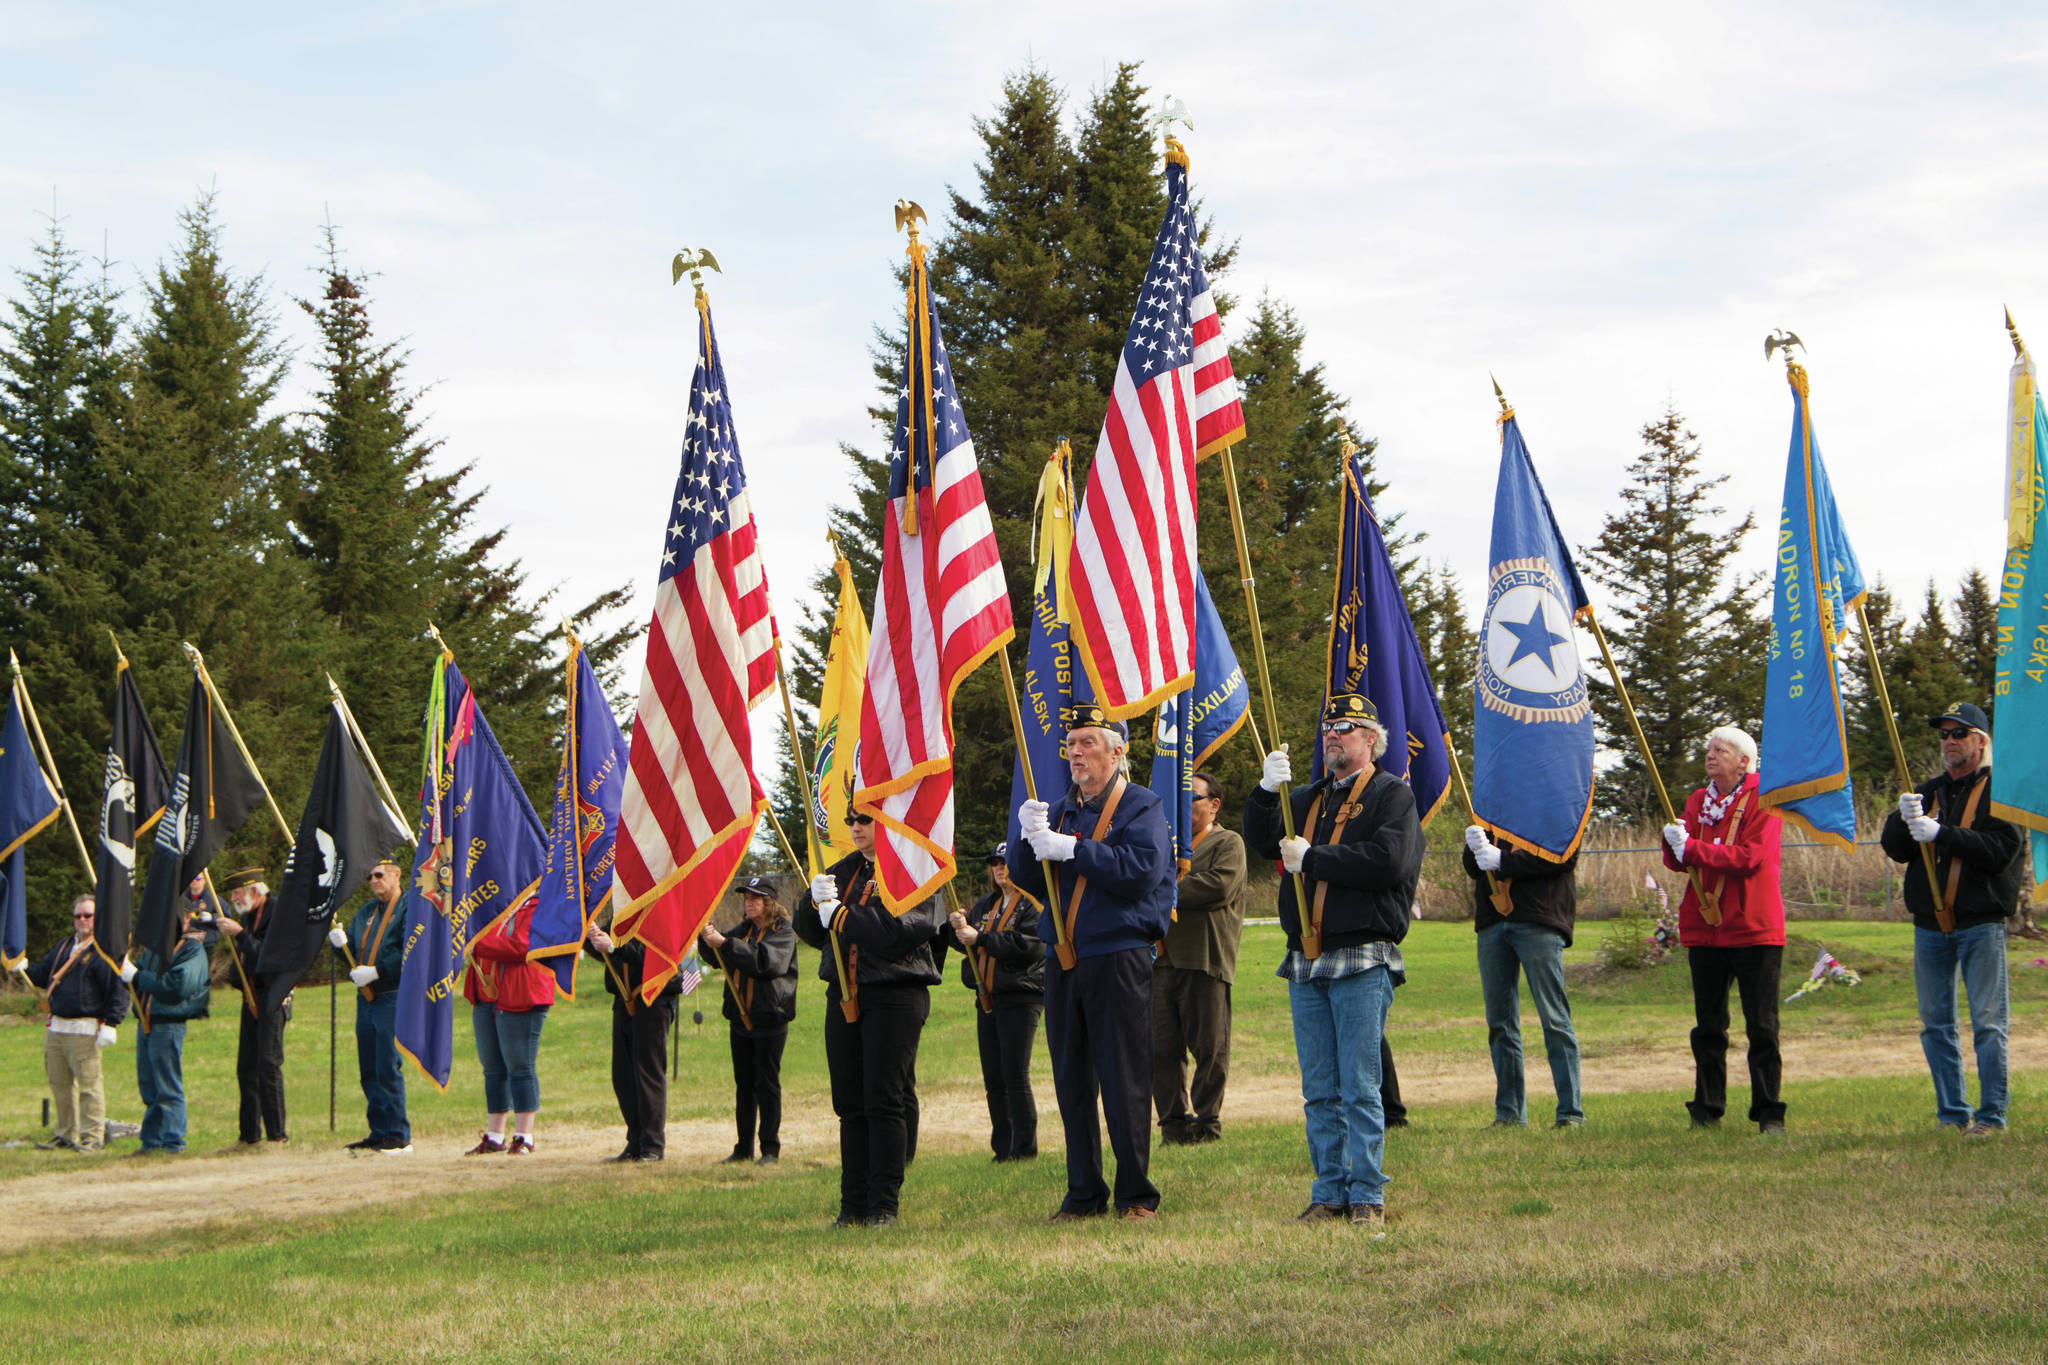 The American Legion Posts 16 and 19 and the Veterans of Foreign Wars Post 10221 color guards stand at attention during the 2021 Memorial Day service held at Hickerson Memorial Cemetery on May 31. (Photo by Sarah Knapp/Homer News)